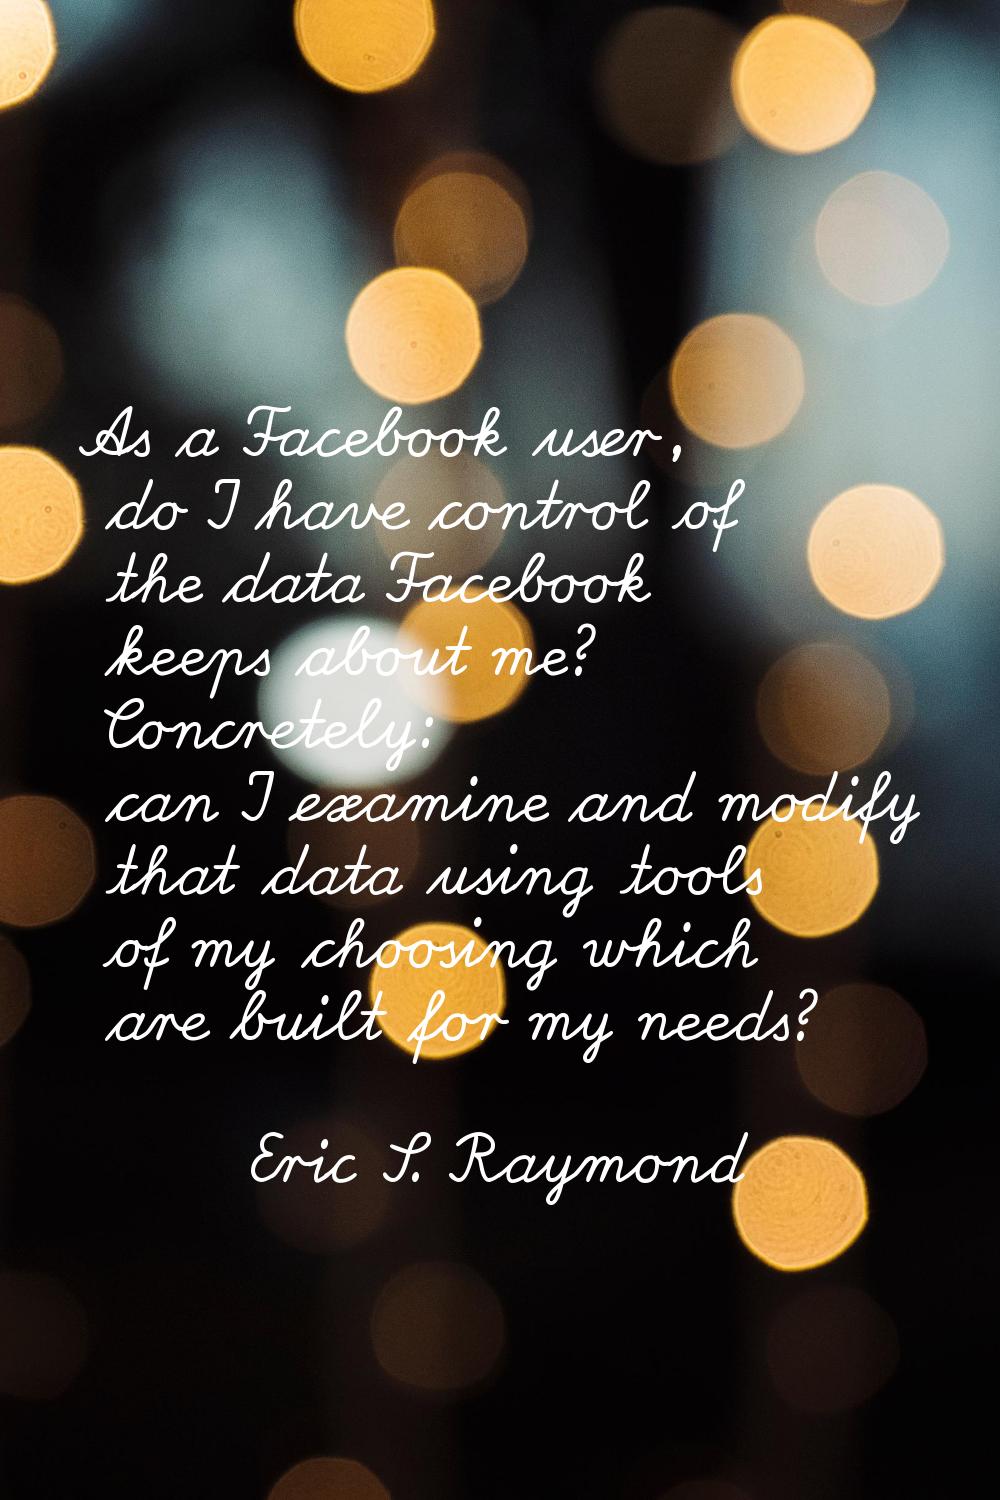 As a Facebook user, do I have control of the data Facebook keeps about me? Concretely: can I examin